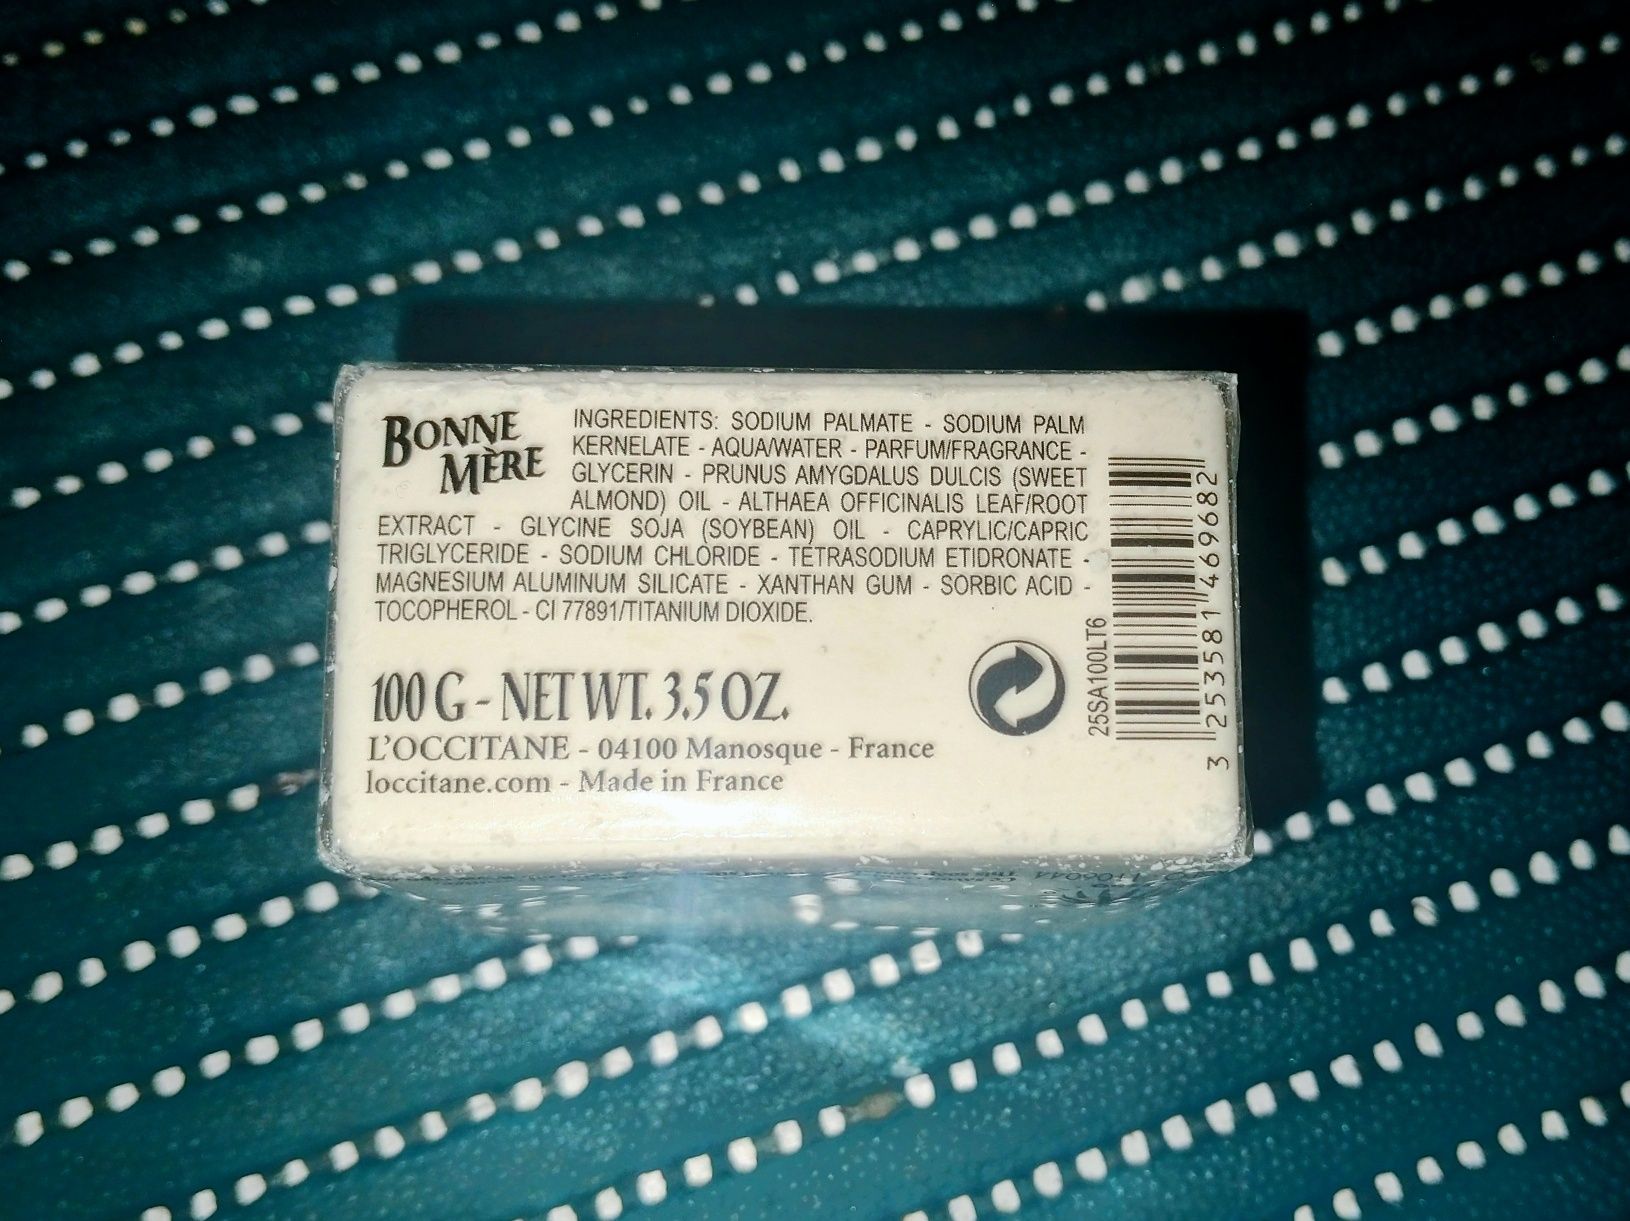 Mydło w kostce 100g L'OCCITANE Bonne Mere - Made in France.

MARSEGALE